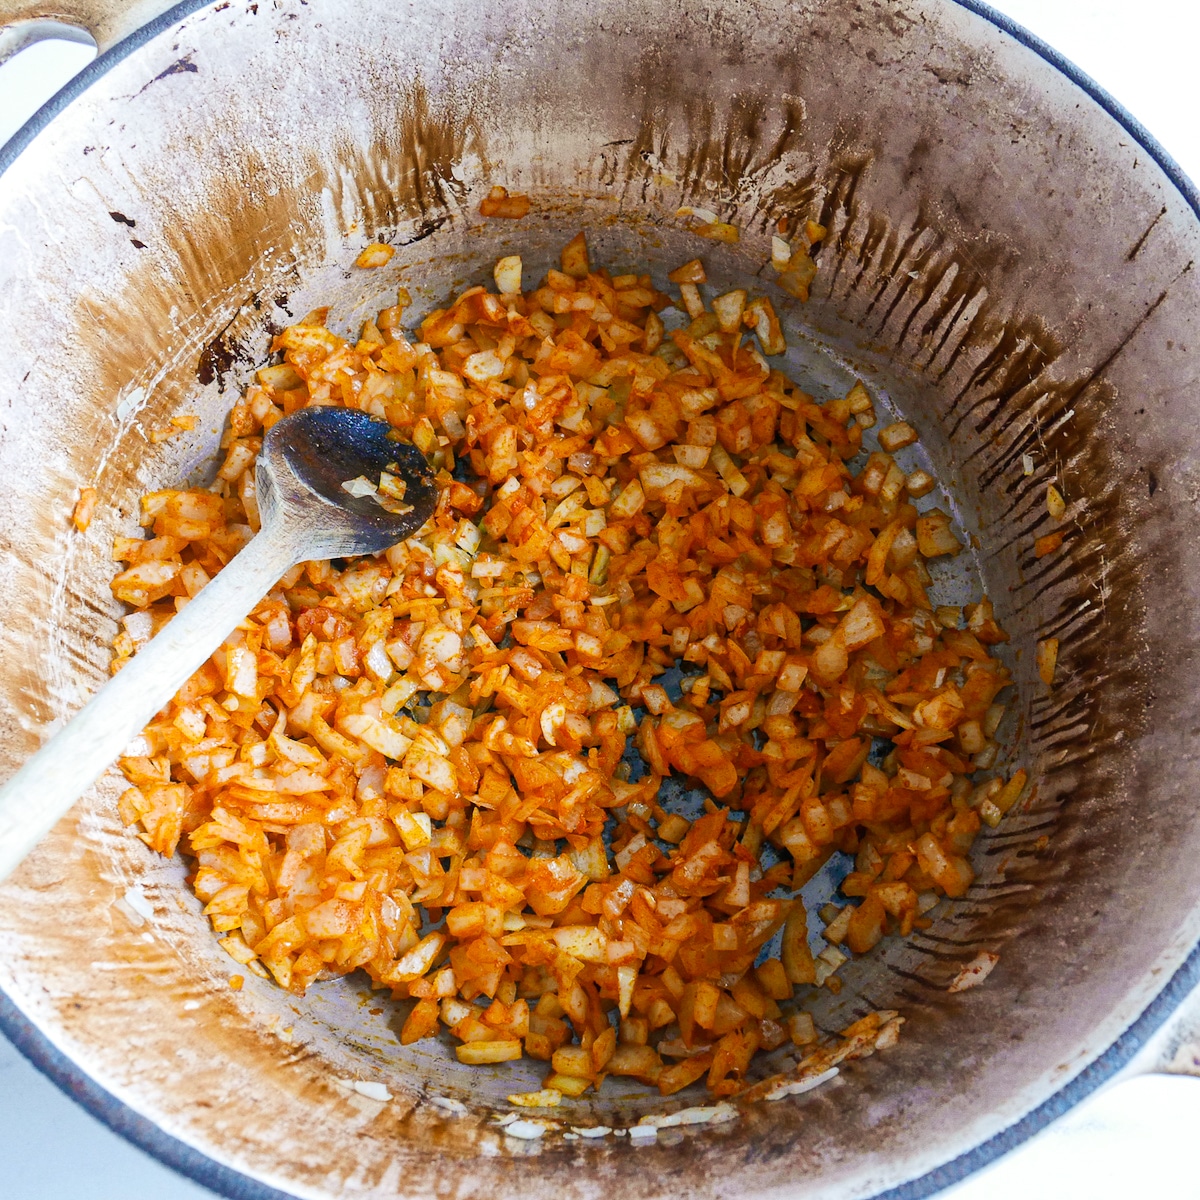 Paprika and garlic added to cooking onion mixture.